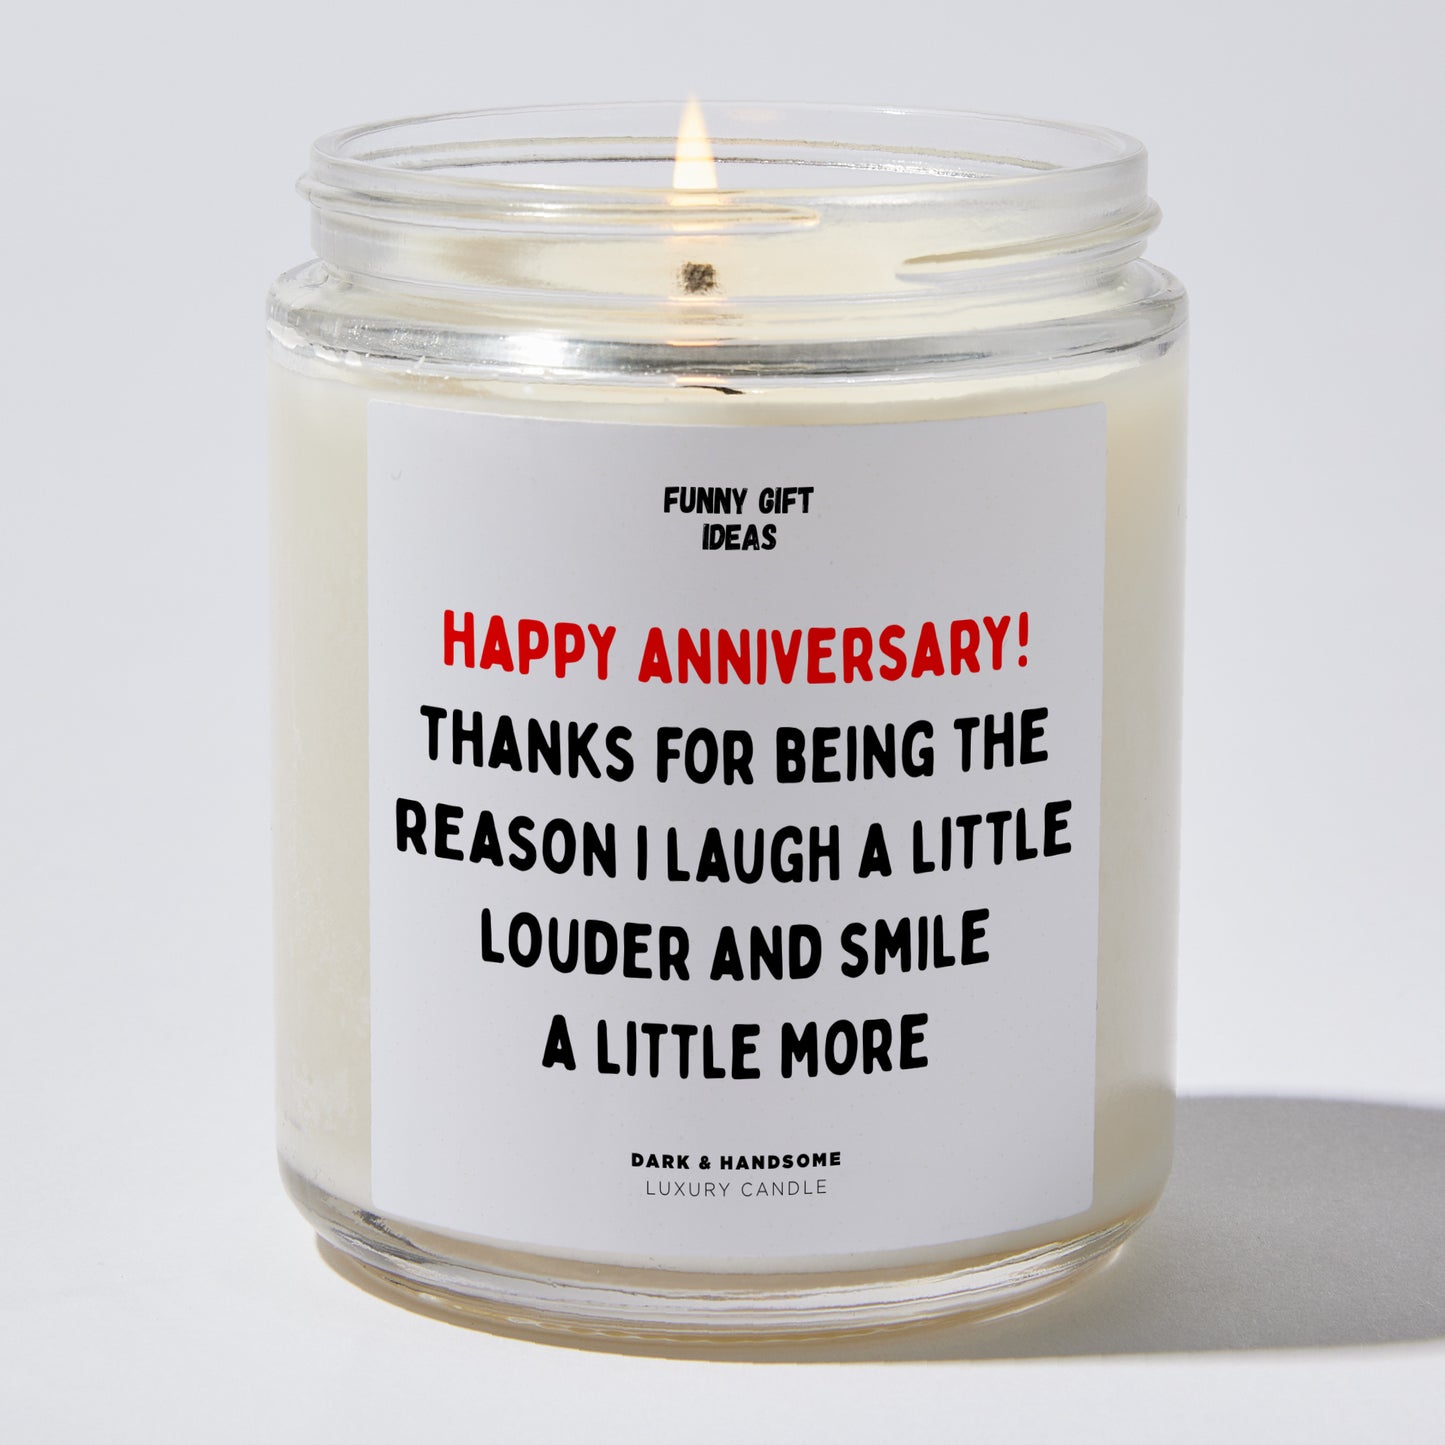 Anniversary Present - Happy Anniversary! Thanks for Being the Reason I Laugh a Little Louder and Smile a Little More. - Candle